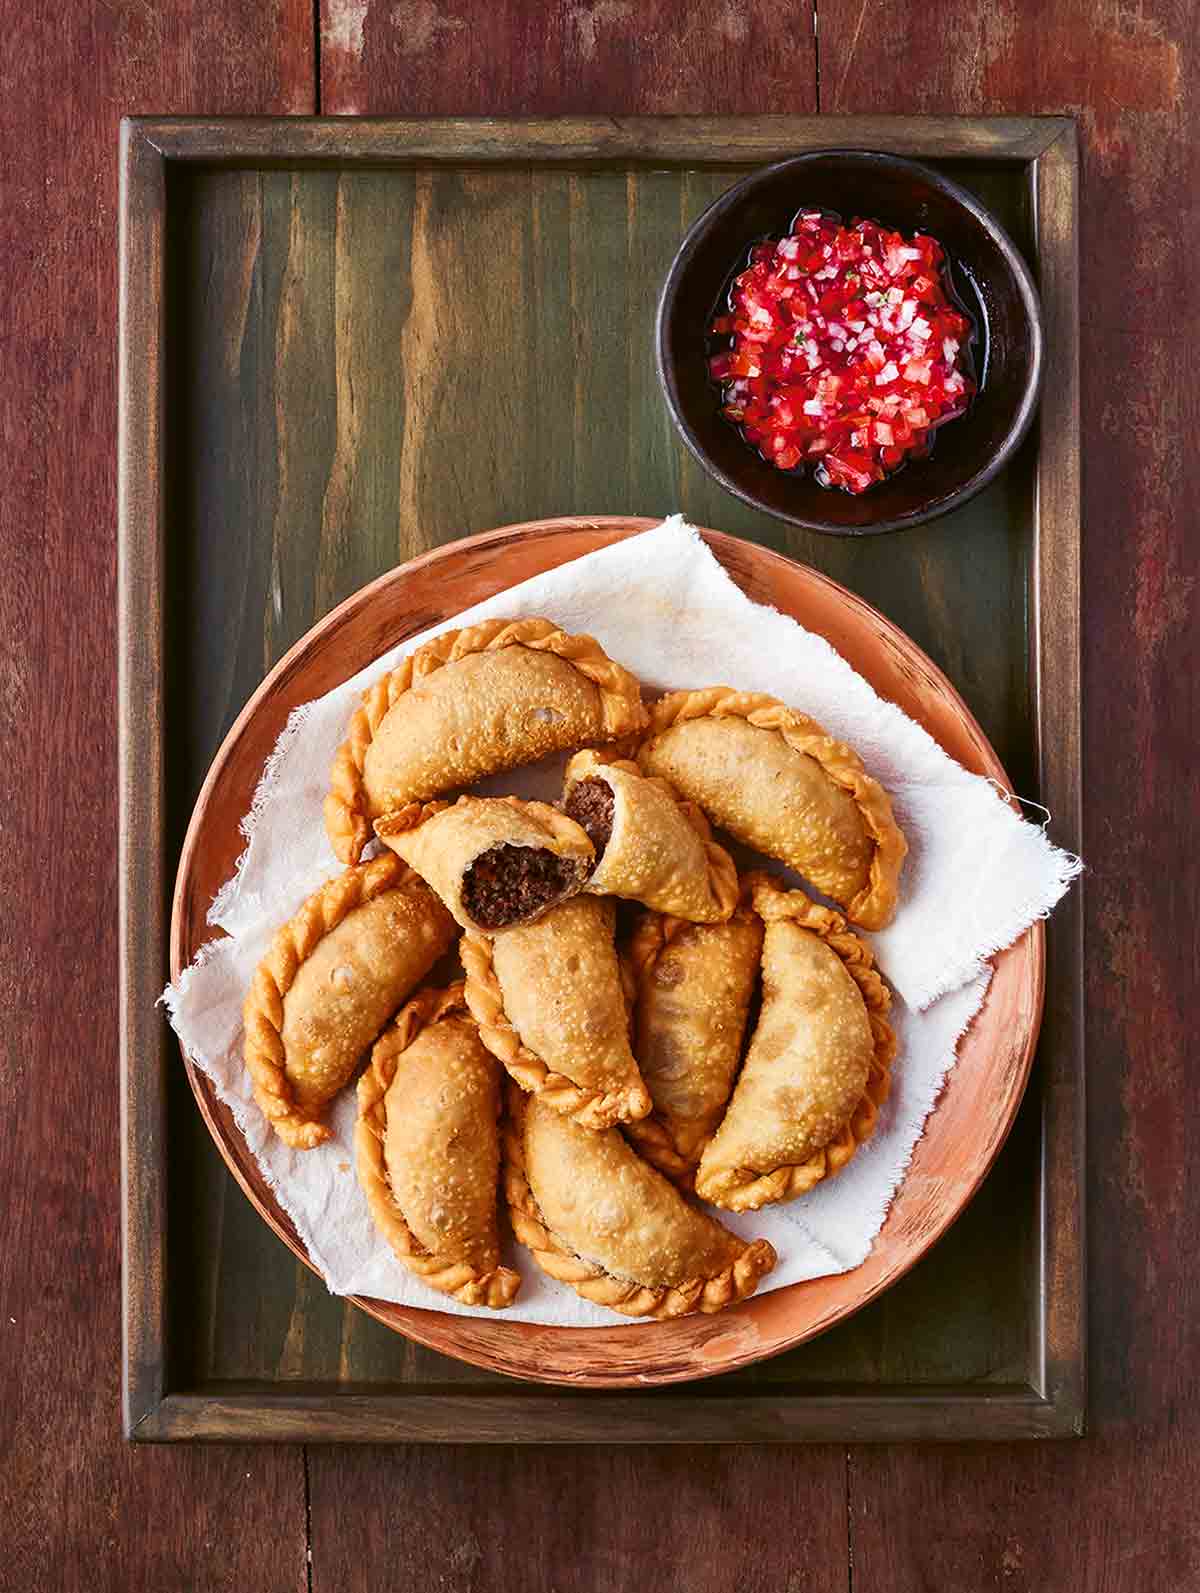 A pile of Chilean meat empanadas on a plate on a wooden tray with a dish of tomato relish on the side